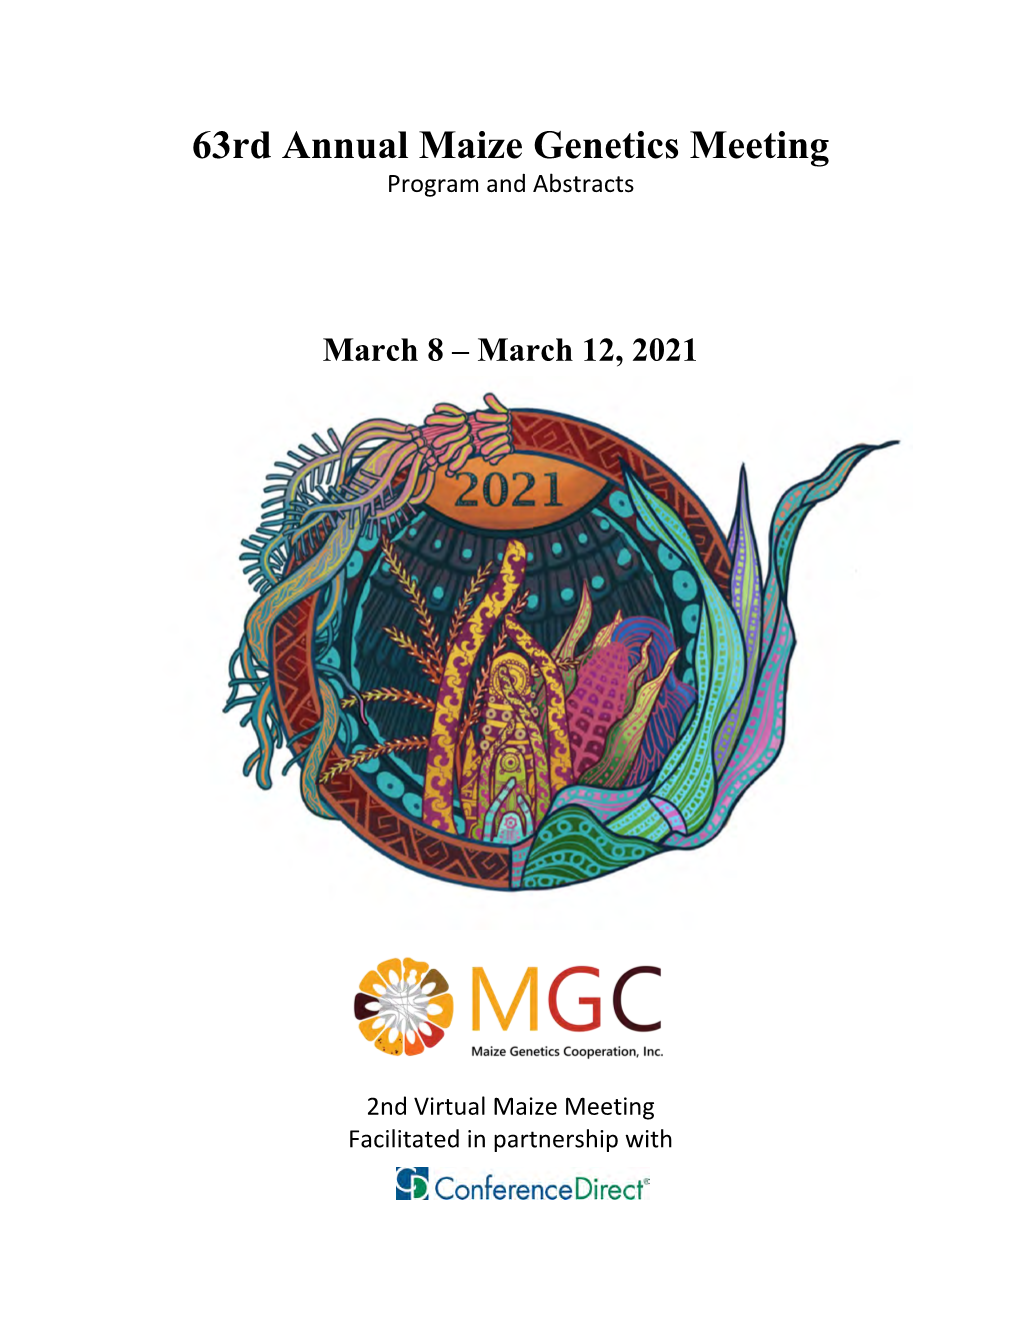 63Rd Annual Maize Genetics Meeting Program and Abstracts